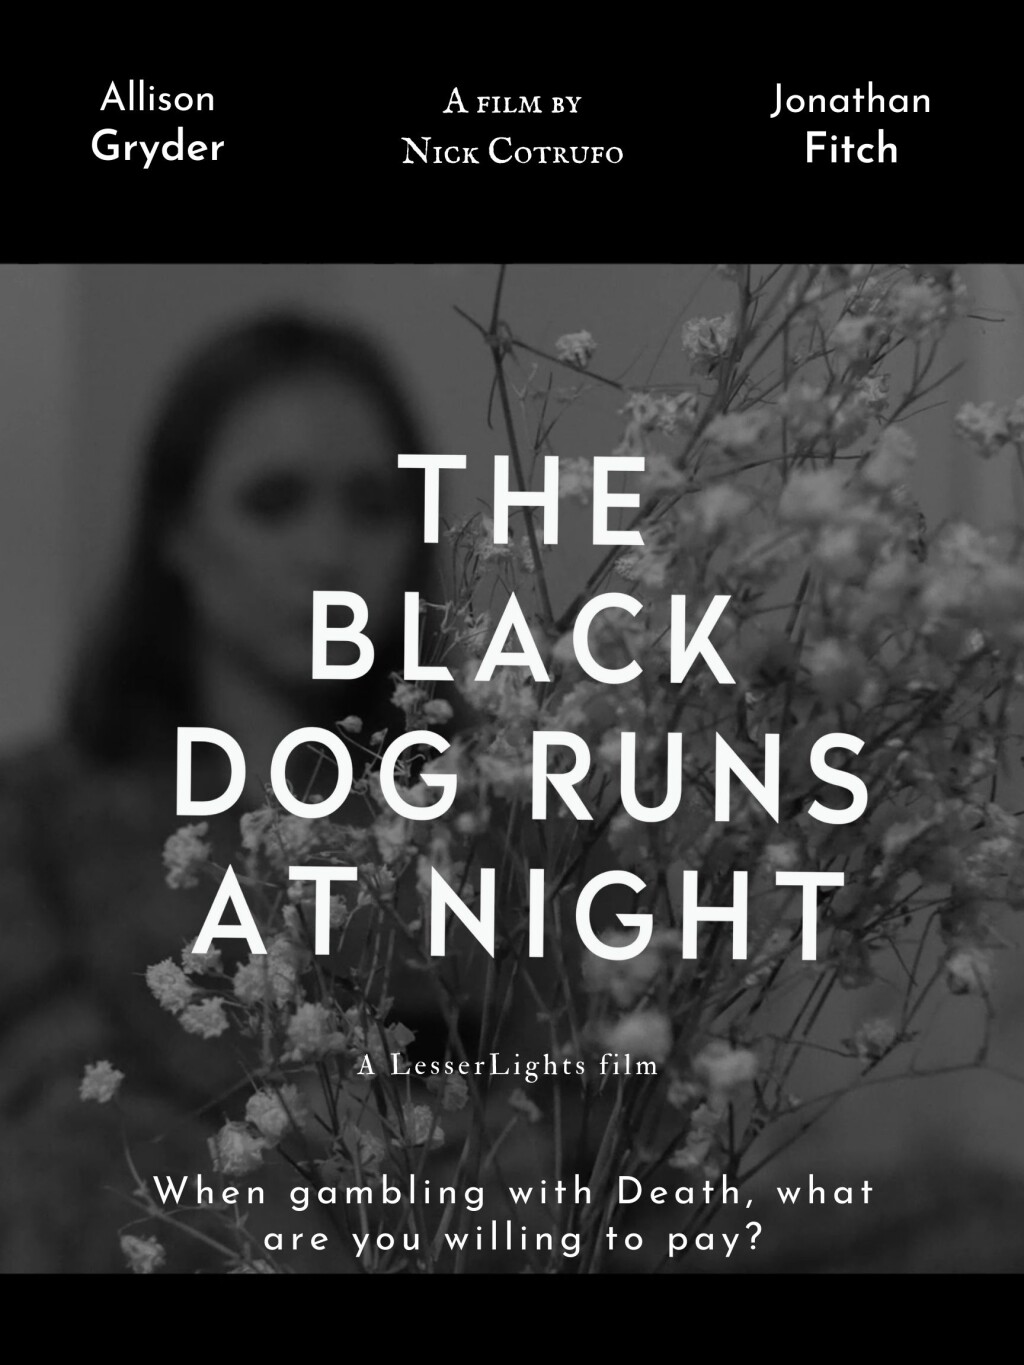 Filmposter for The Black Dog Runs at Night